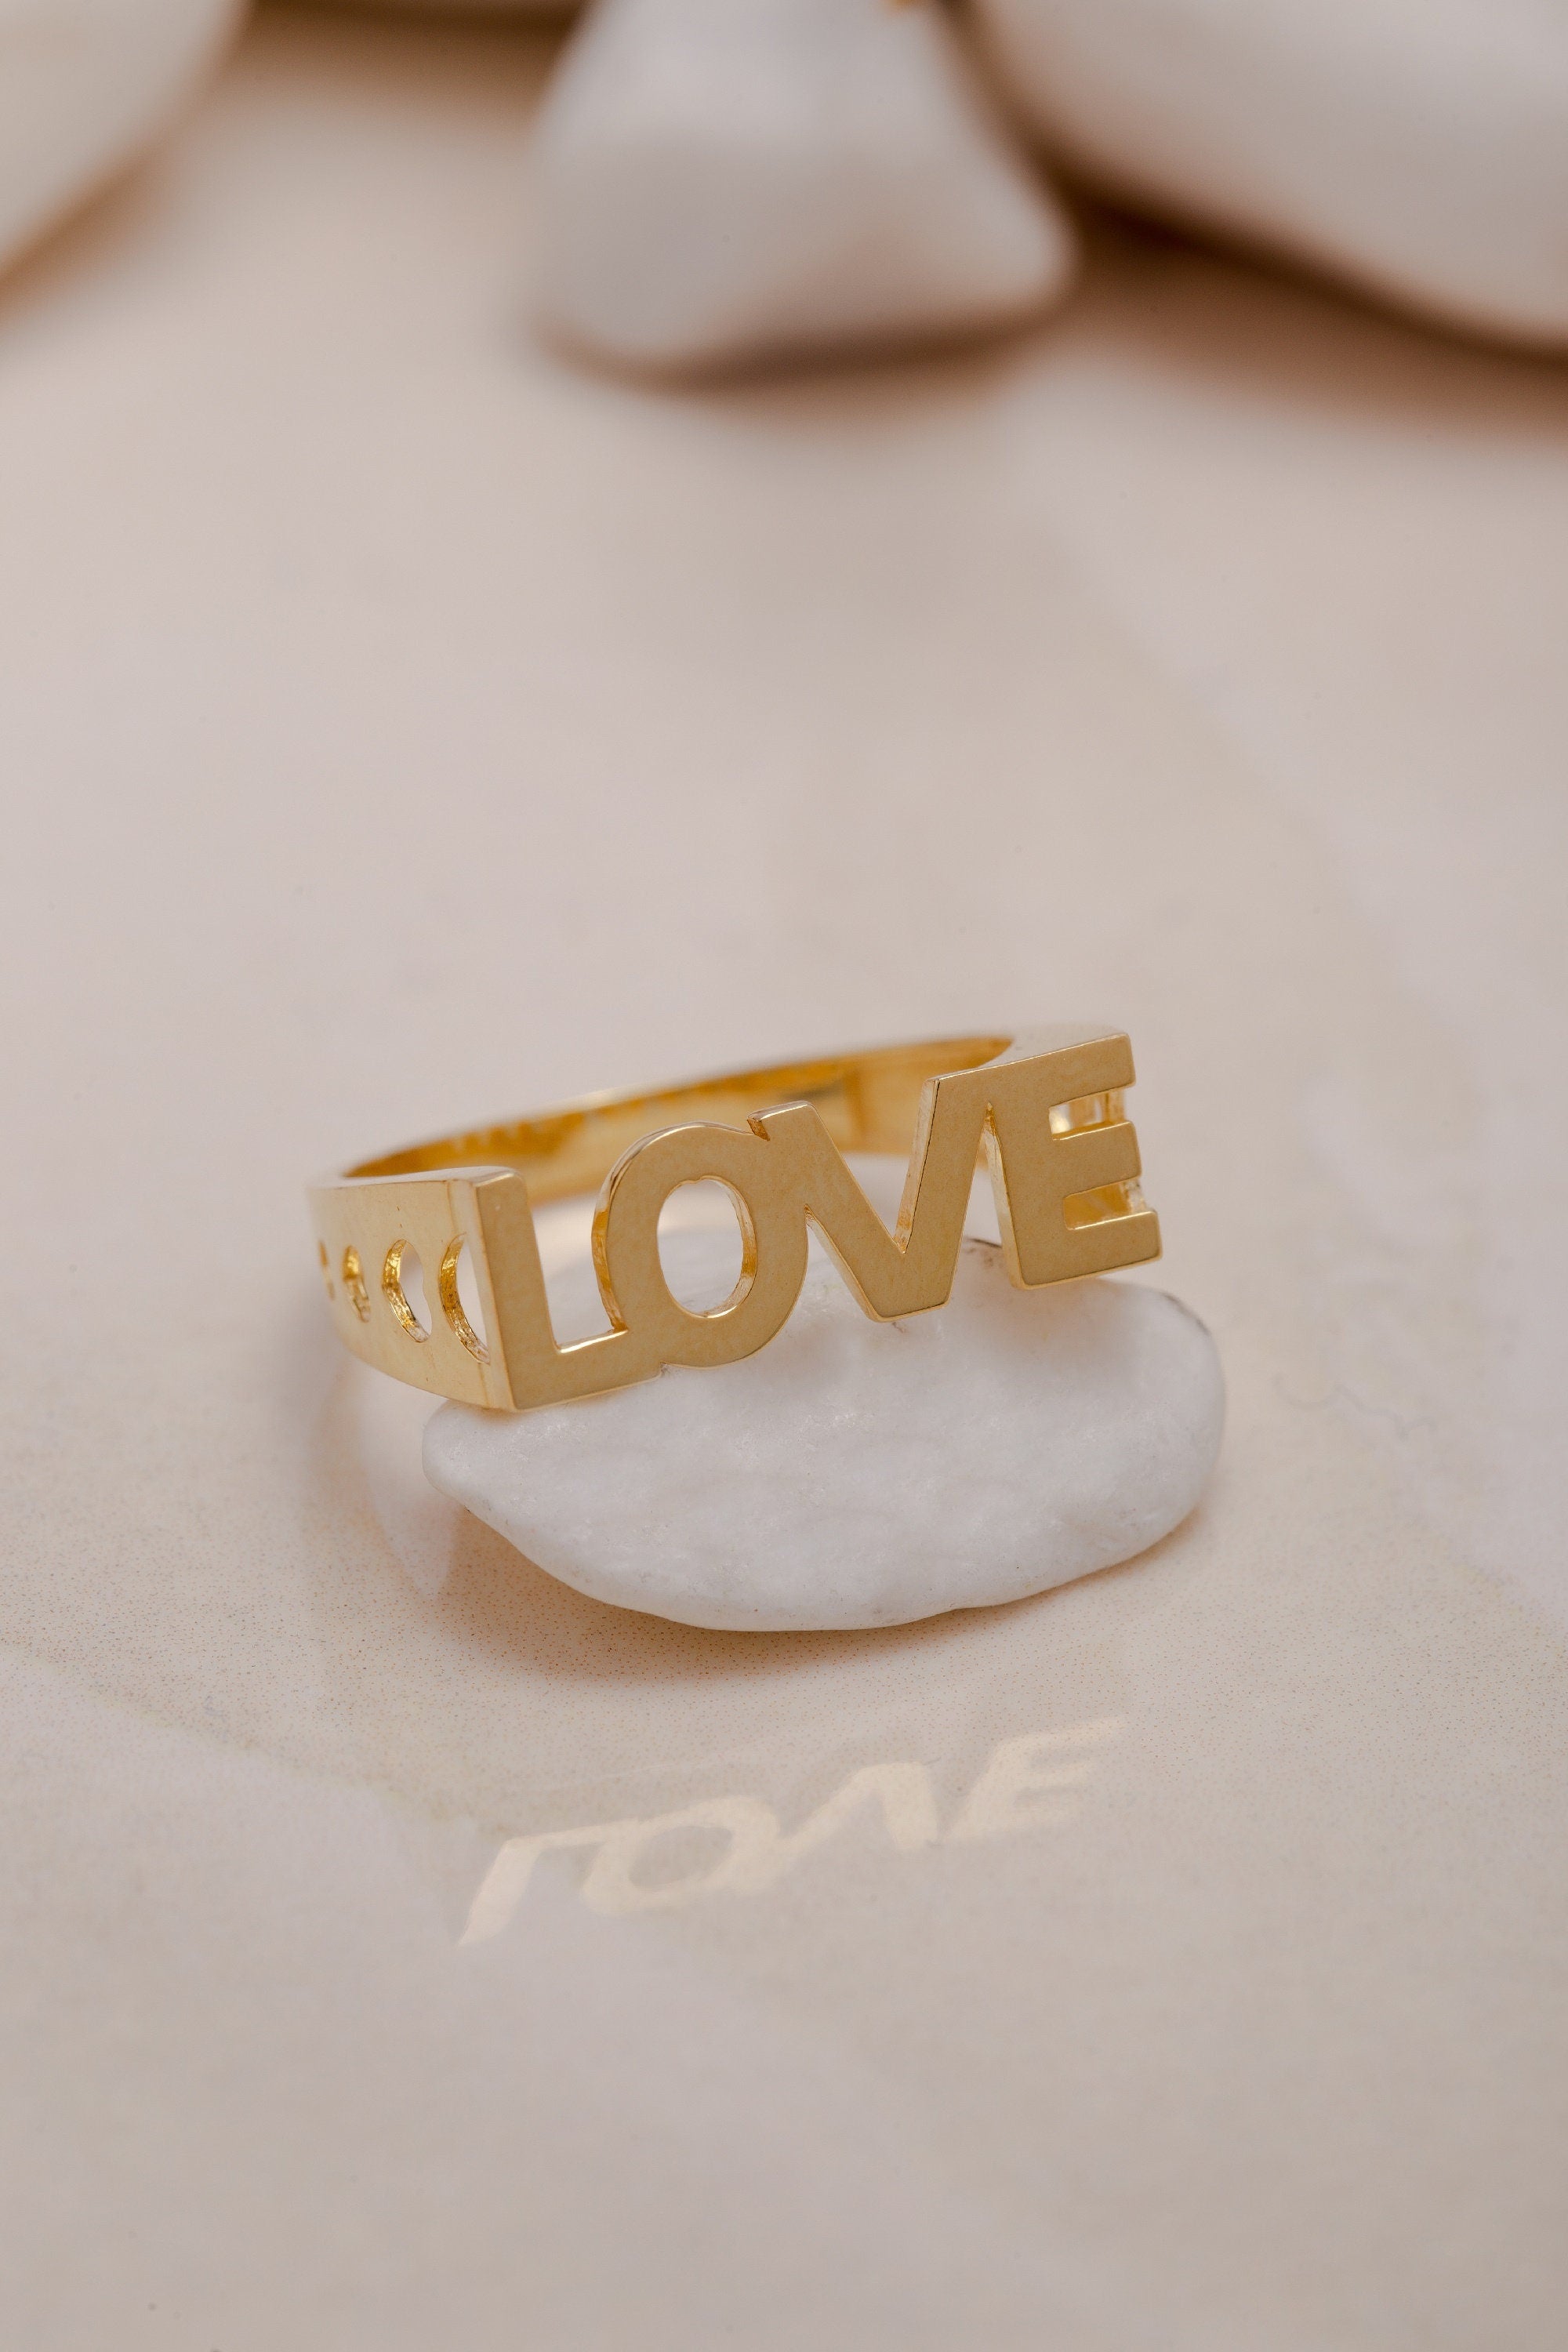 14K Gold Love Wedding Band, Custom Engraved Love Ring, Women's Romantic Ring for Her, 925 Sterling Silver Love Band, Valentine's Day Gift